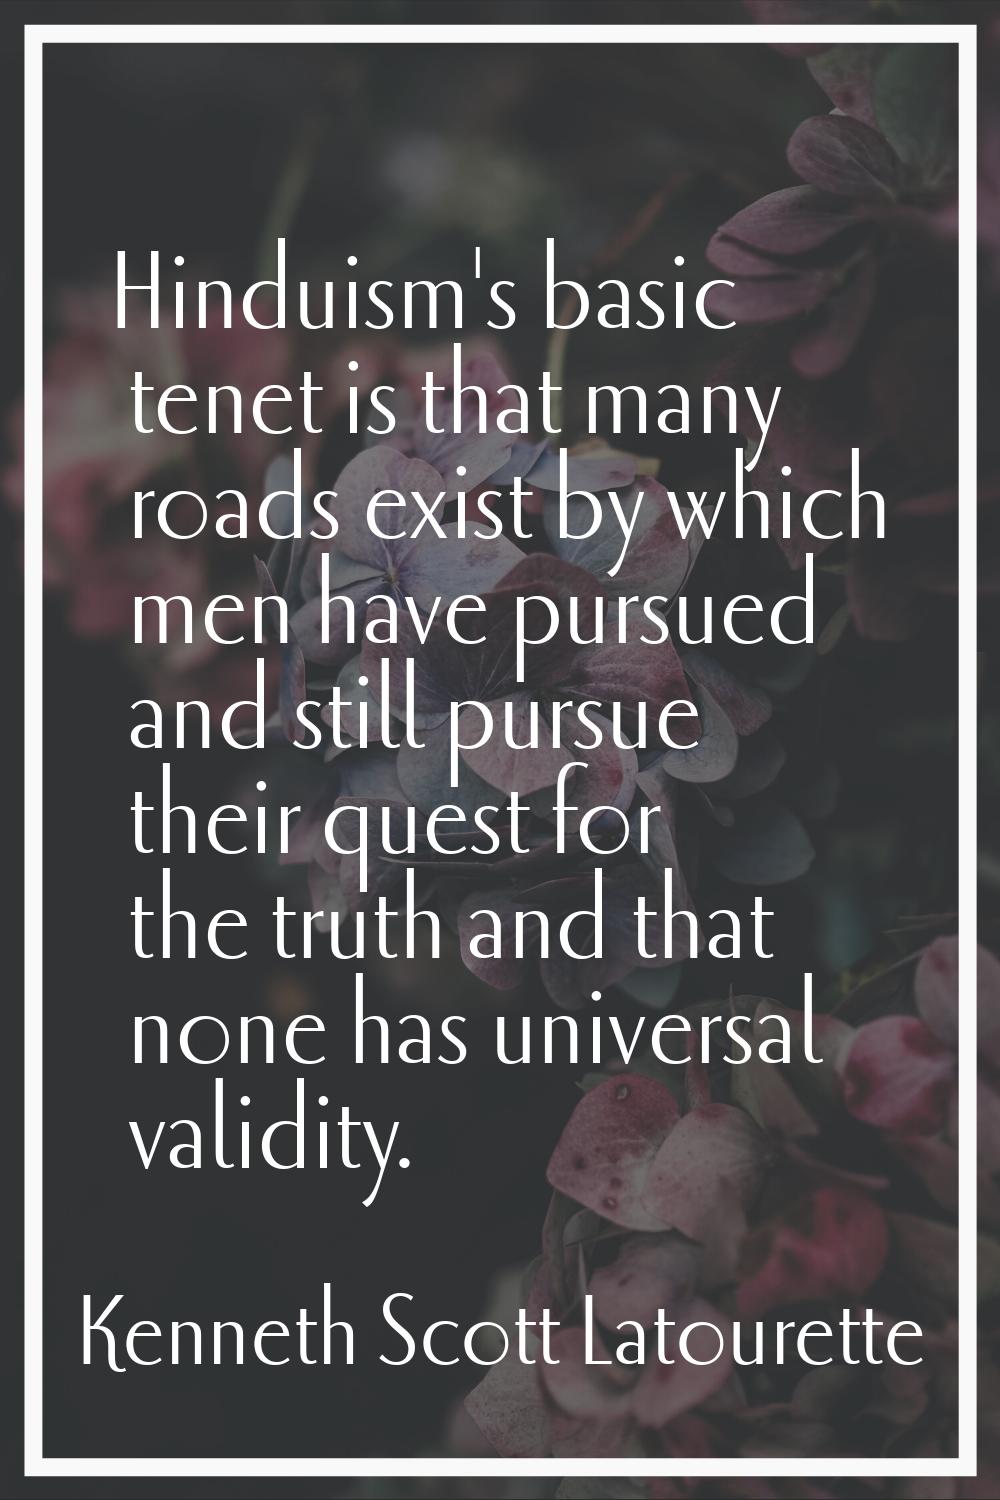 Hinduism's basic tenet is that many roads exist by which men have pursued and still pursue their qu